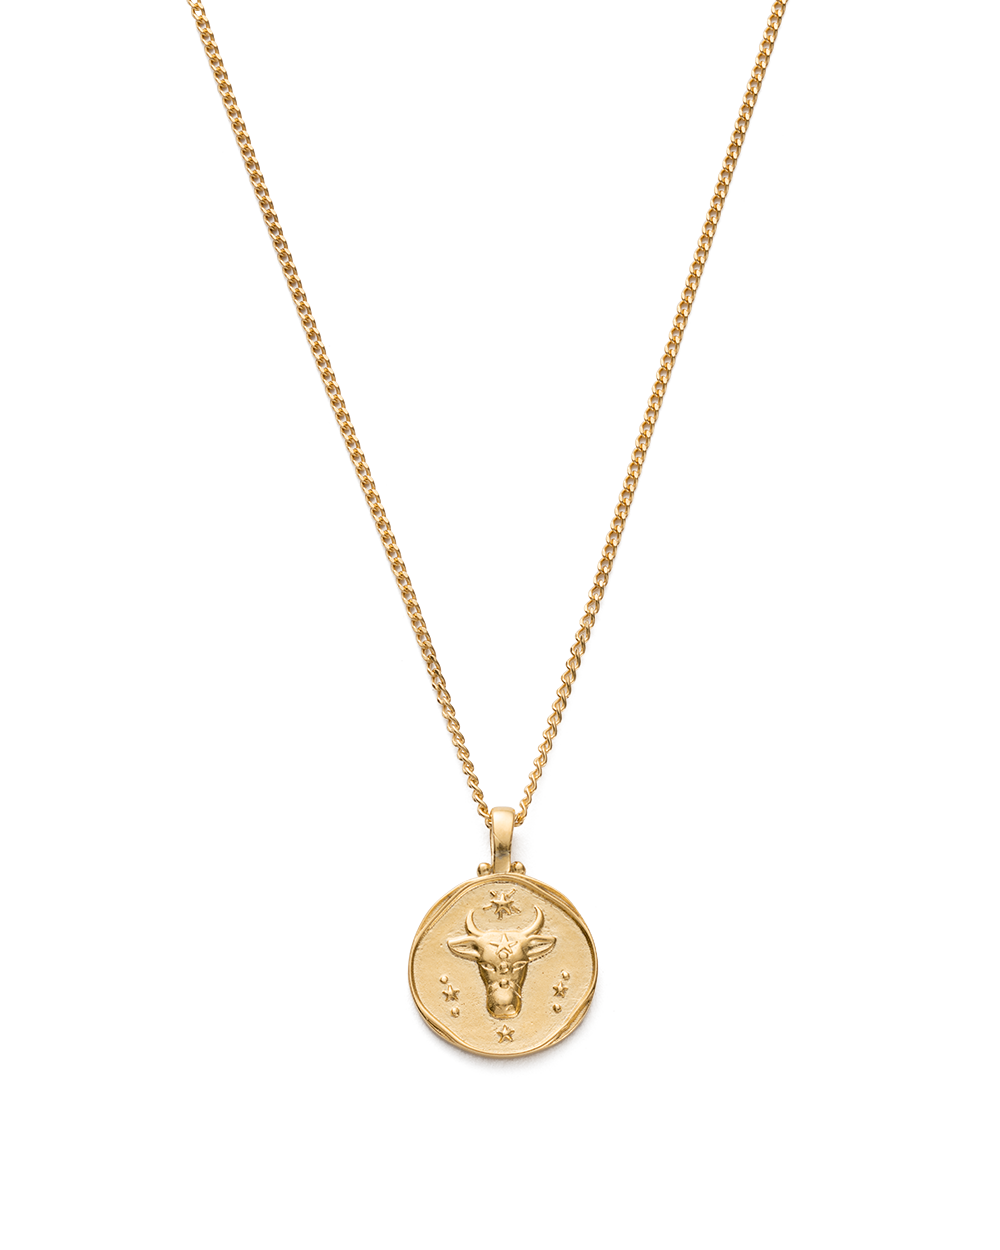 Handmade Gold Zodiac Sign Charm Necklace - Holiday Gift for Girl, Woman –  Rebecca Anne Handmade